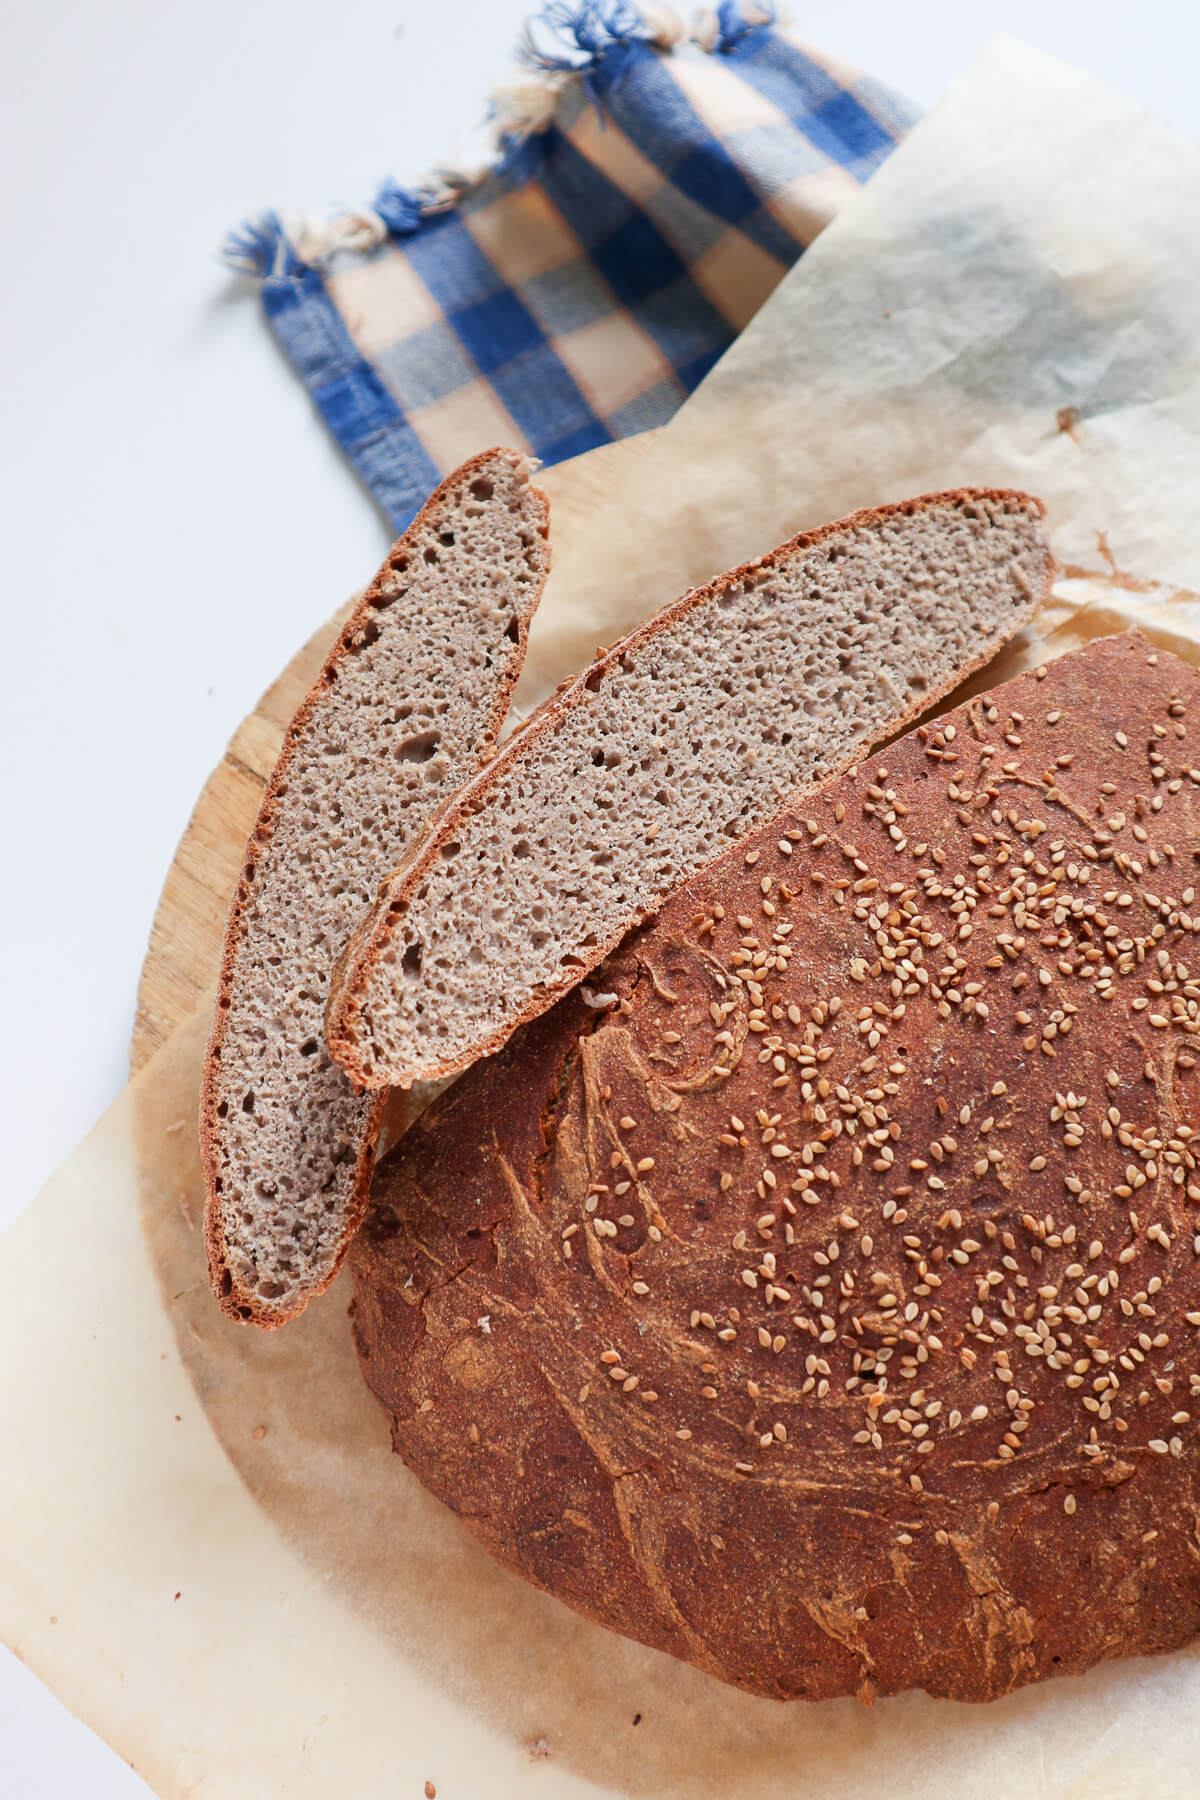 Round artisan looking buckwheat bread with two slices nex to it